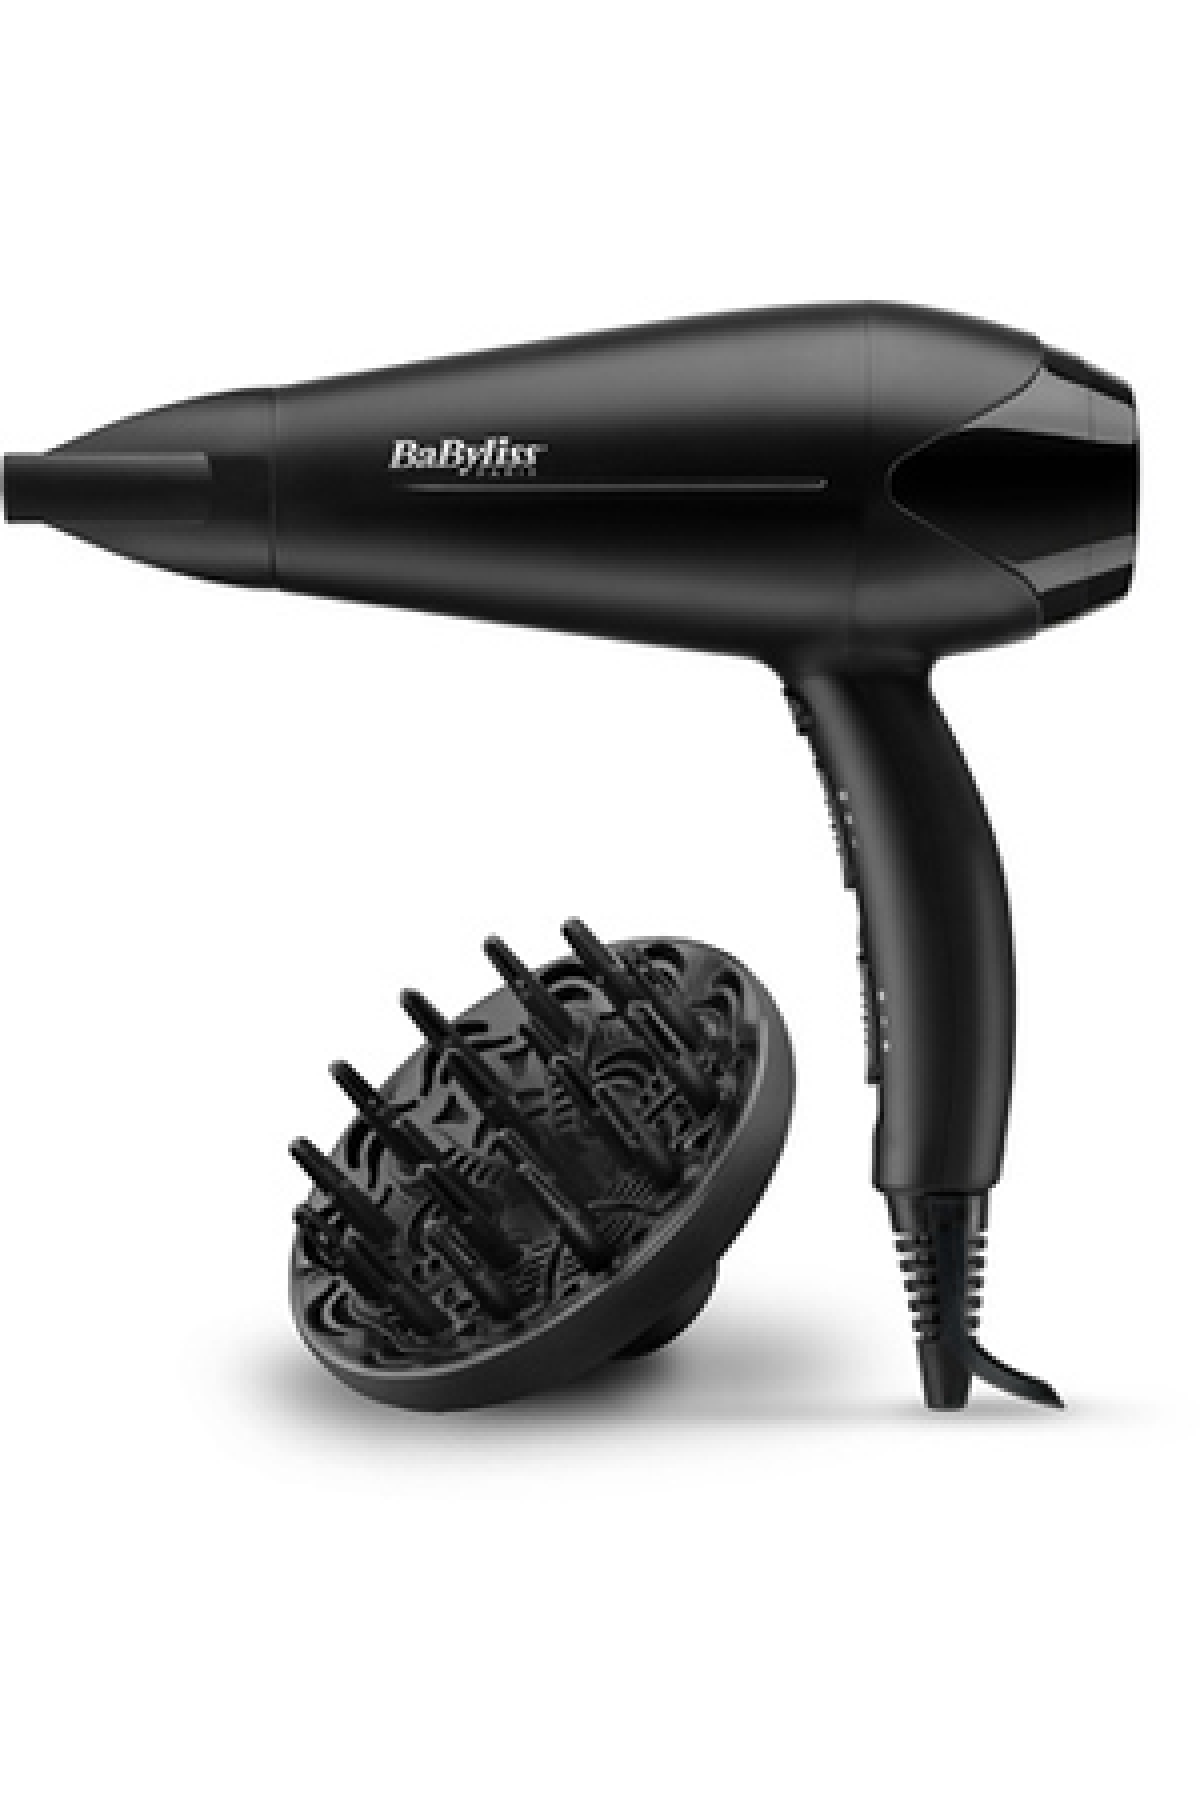 Babyliss Power Dry 2100 Sèche-cheveux